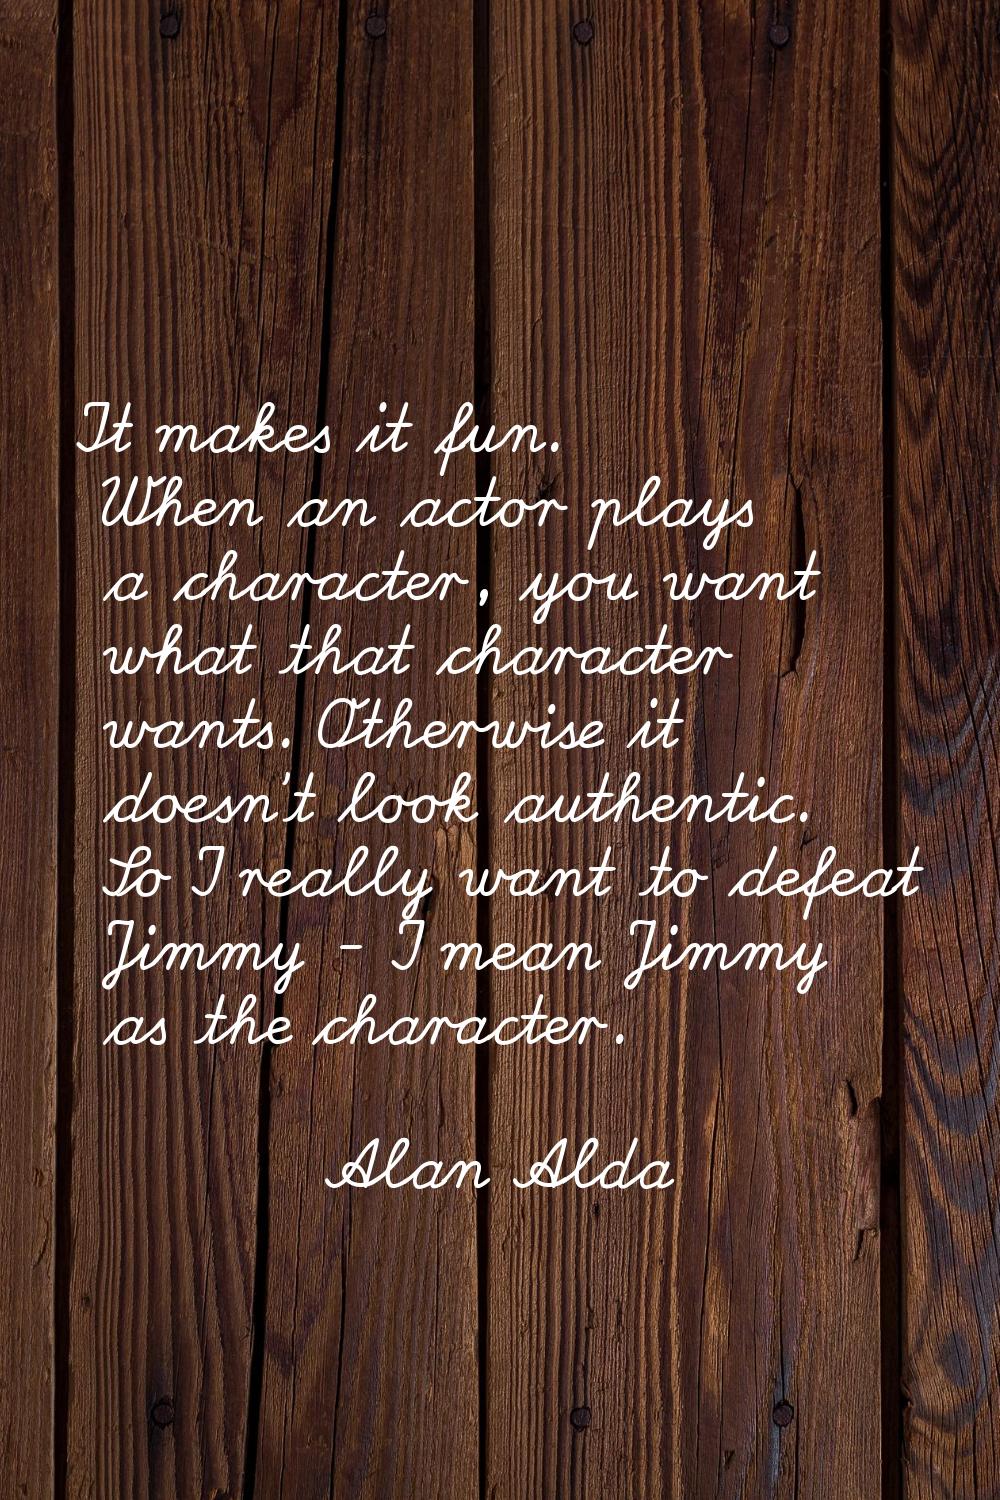 It makes it fun. When an actor plays a character, you want what that character wants. Otherwise it 